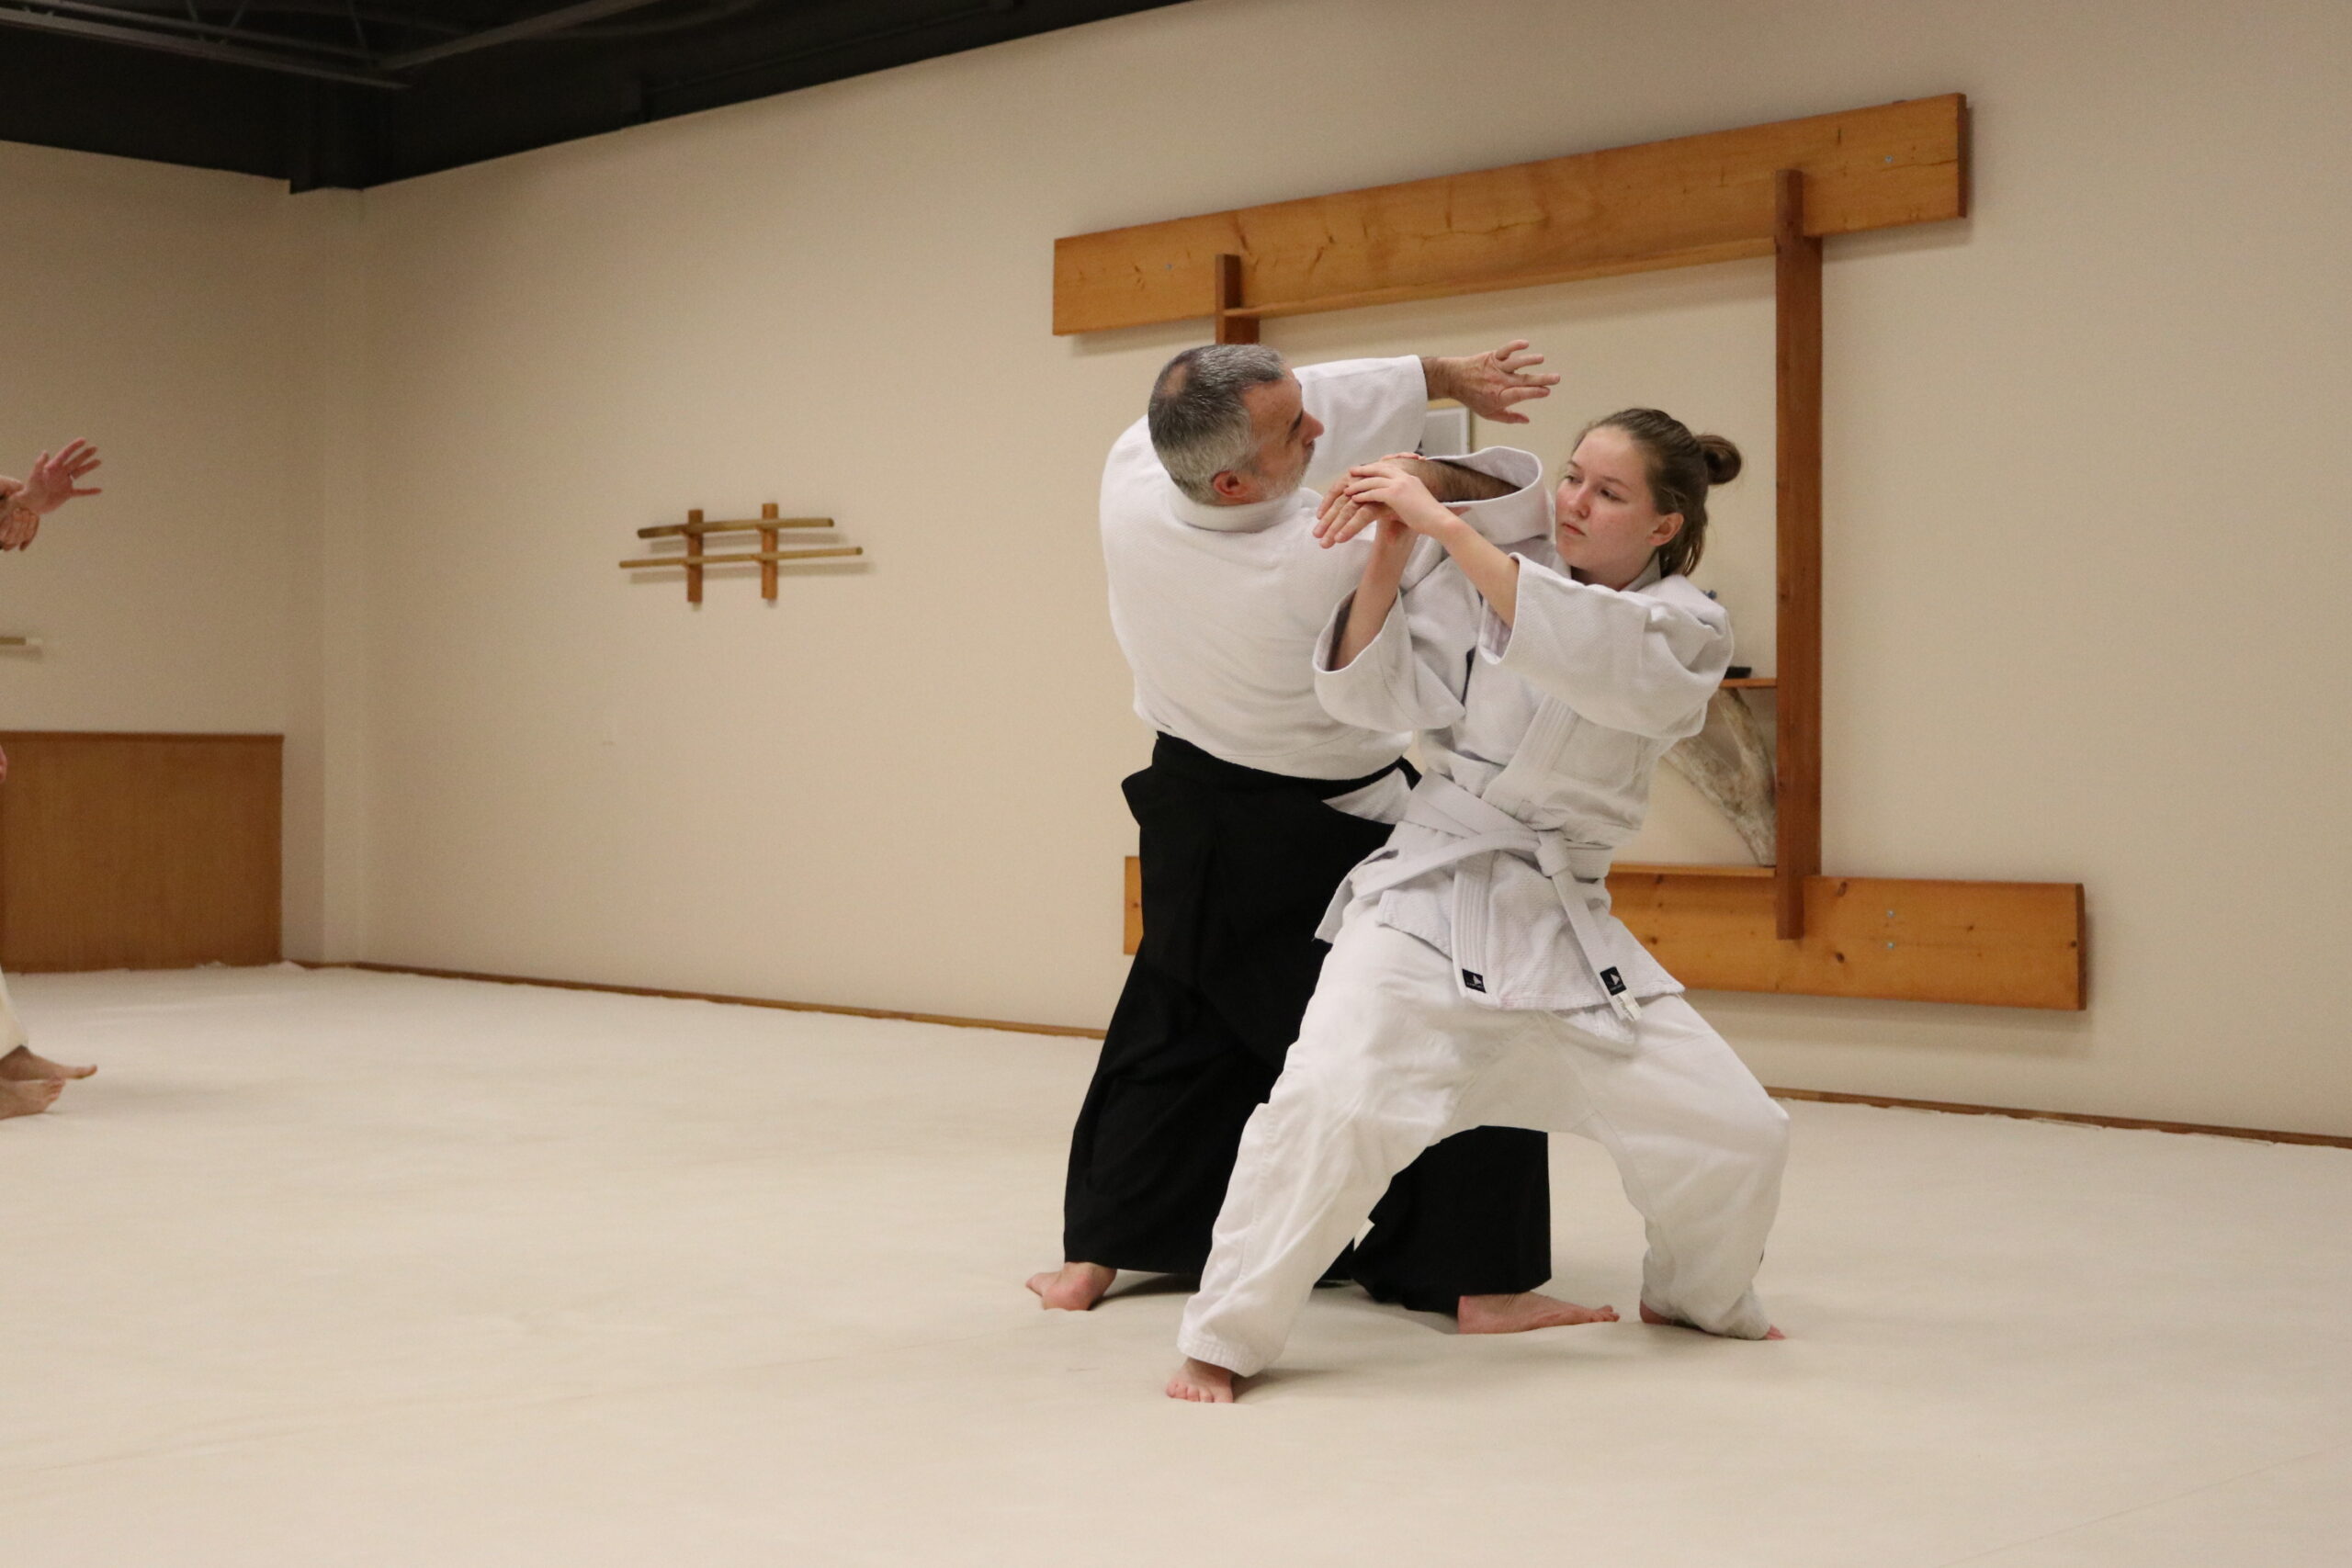 Aikido and the Art of Self Defense